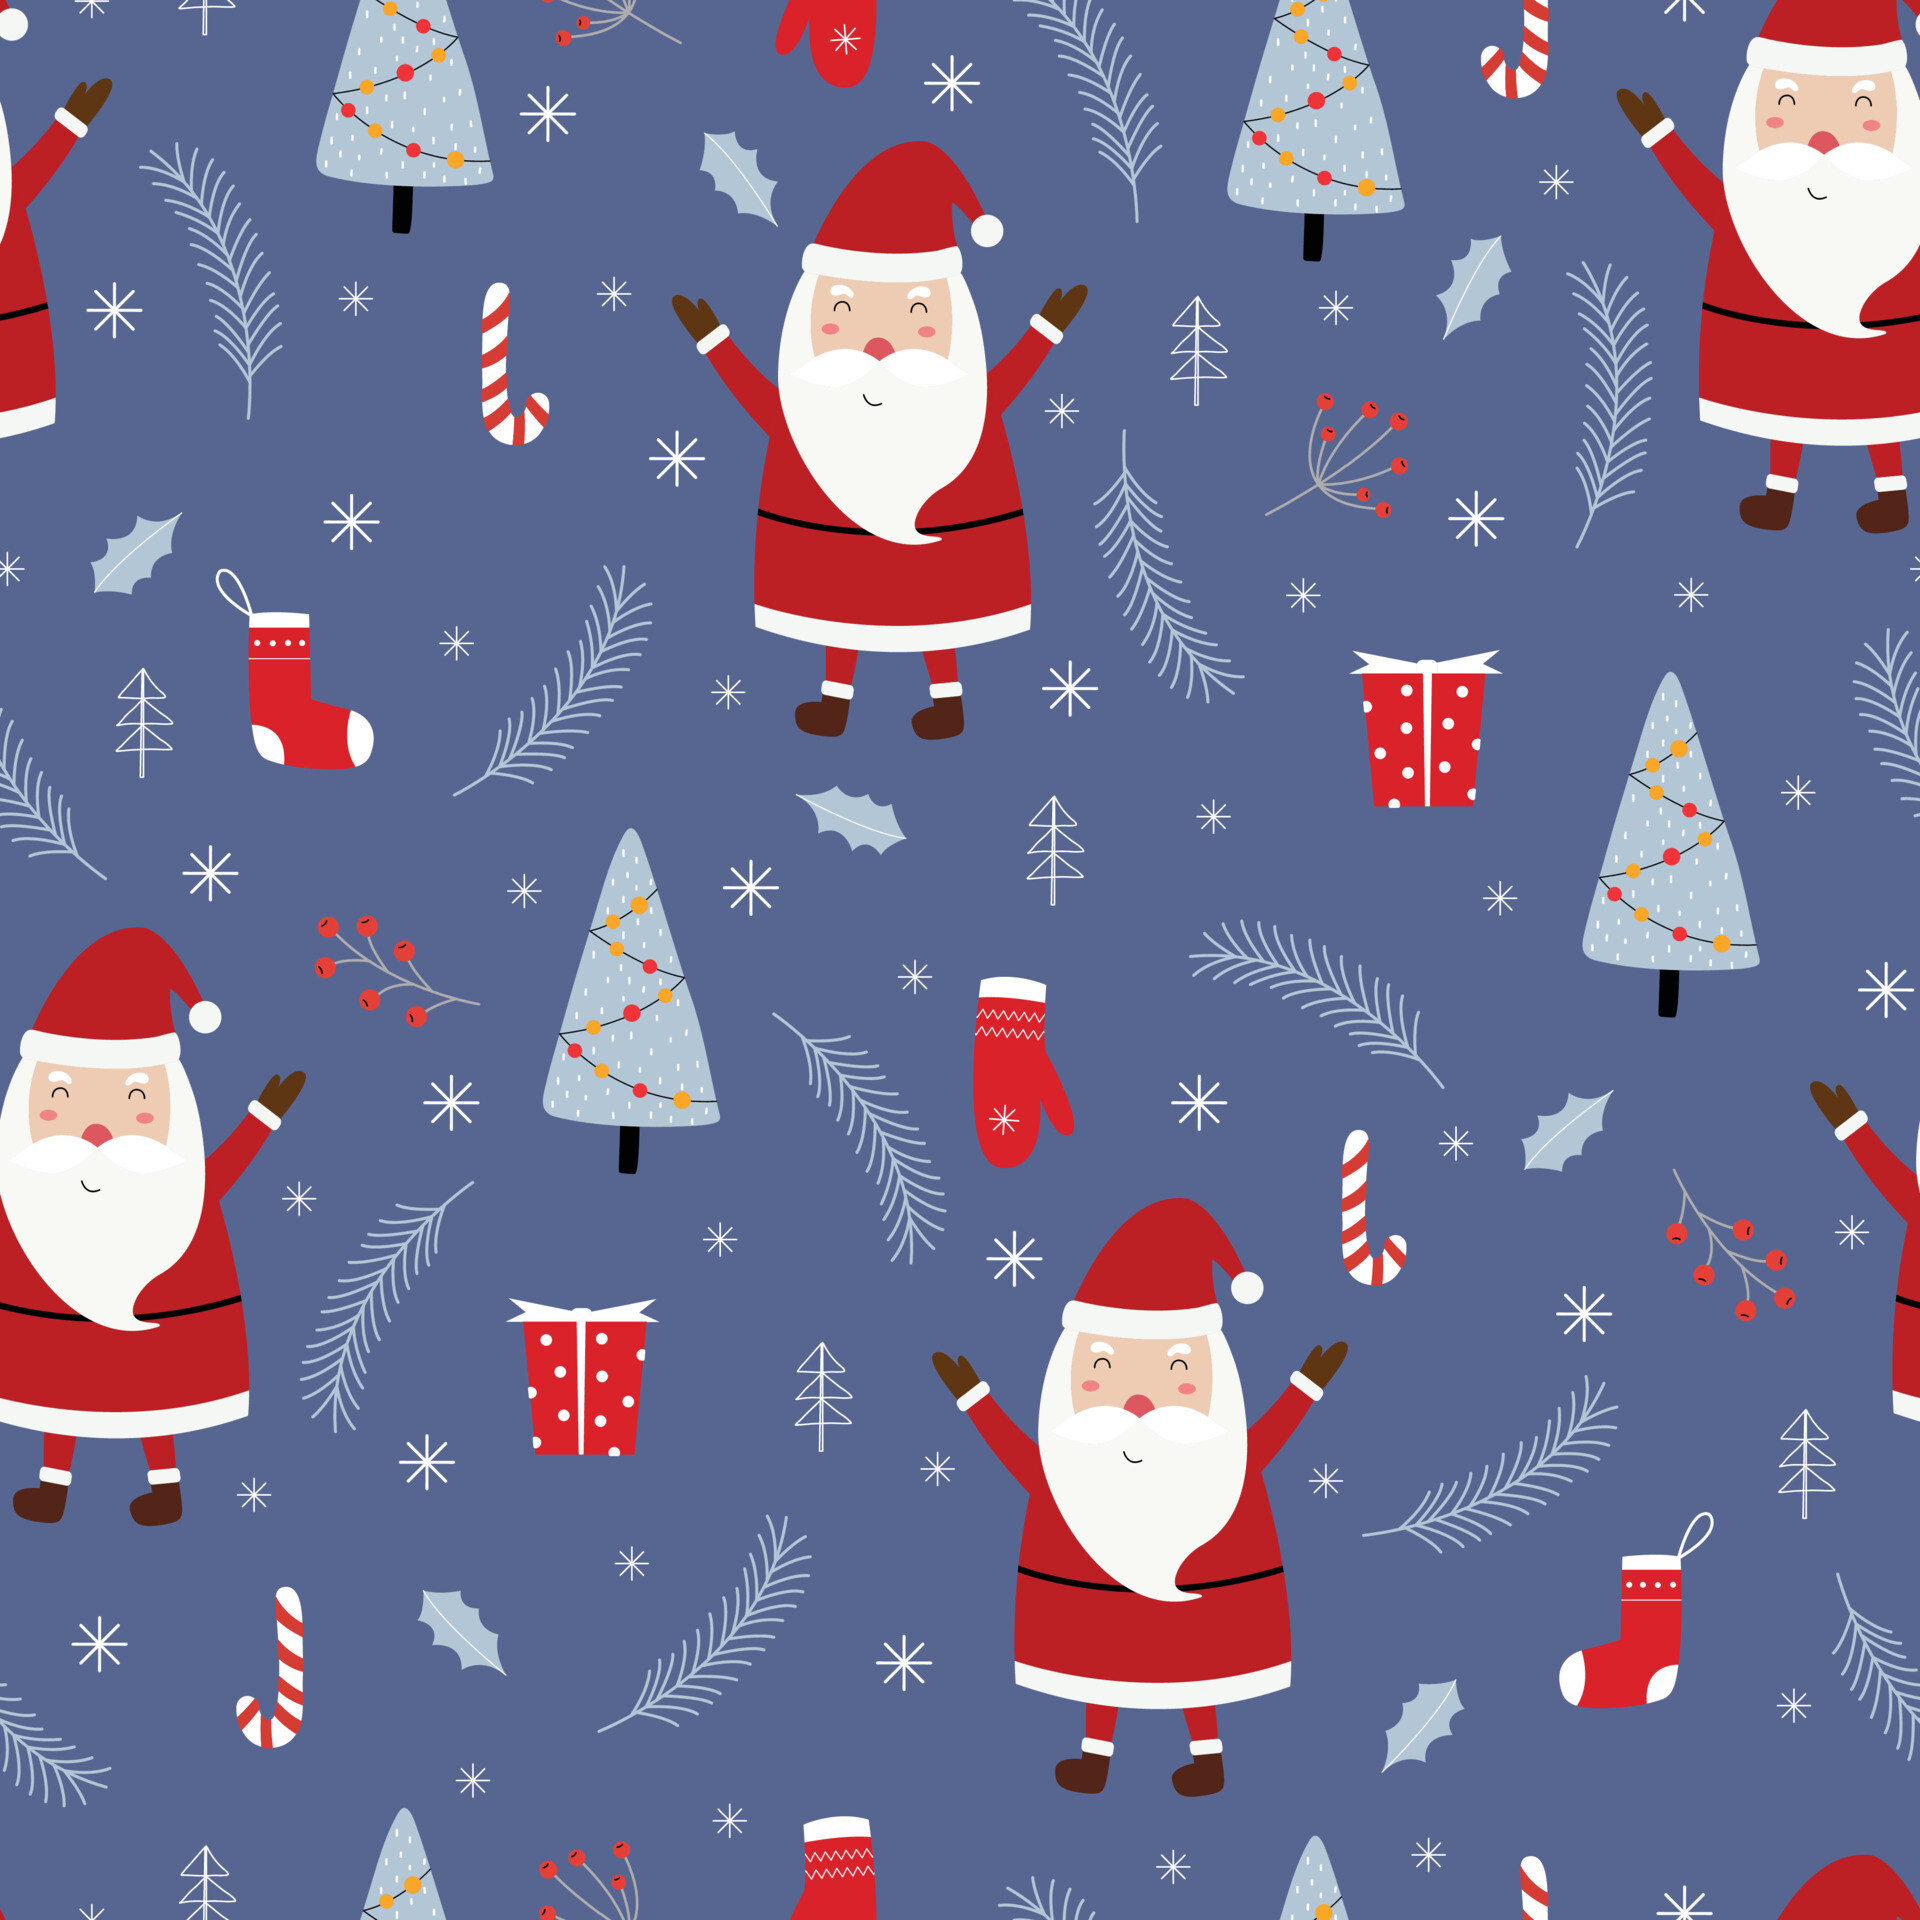 Santa Claus: Christmas tree, A mythical figure who brings gifts to the children in Christmas Eve. 1920x1920 HD Background.